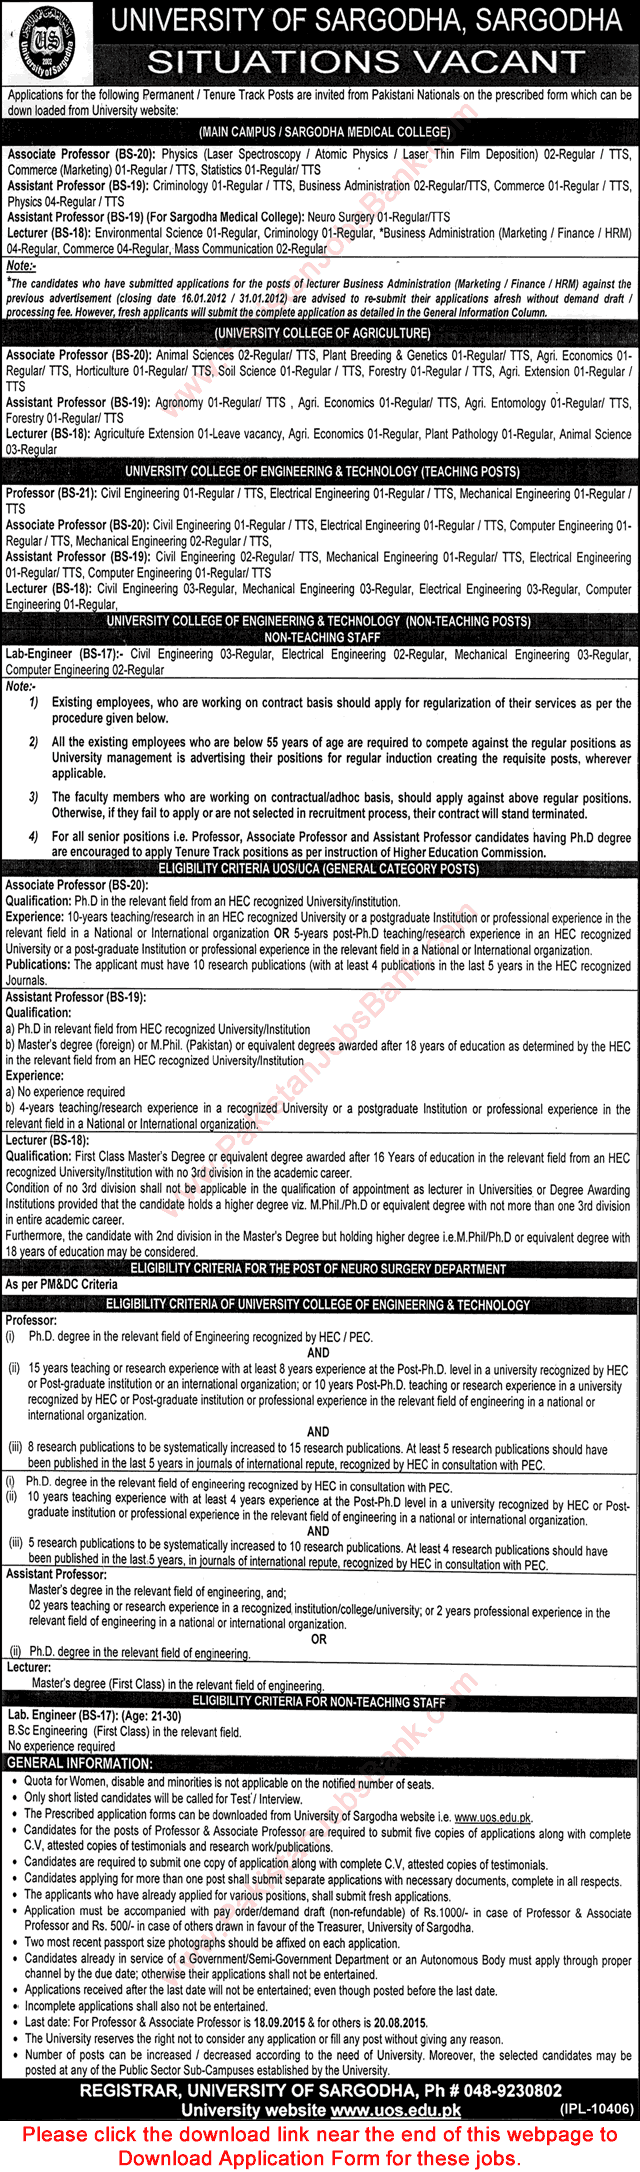 University of Sargodha Jobs 2015 August Application Form Download Teaching Faculty & Lab Engineers